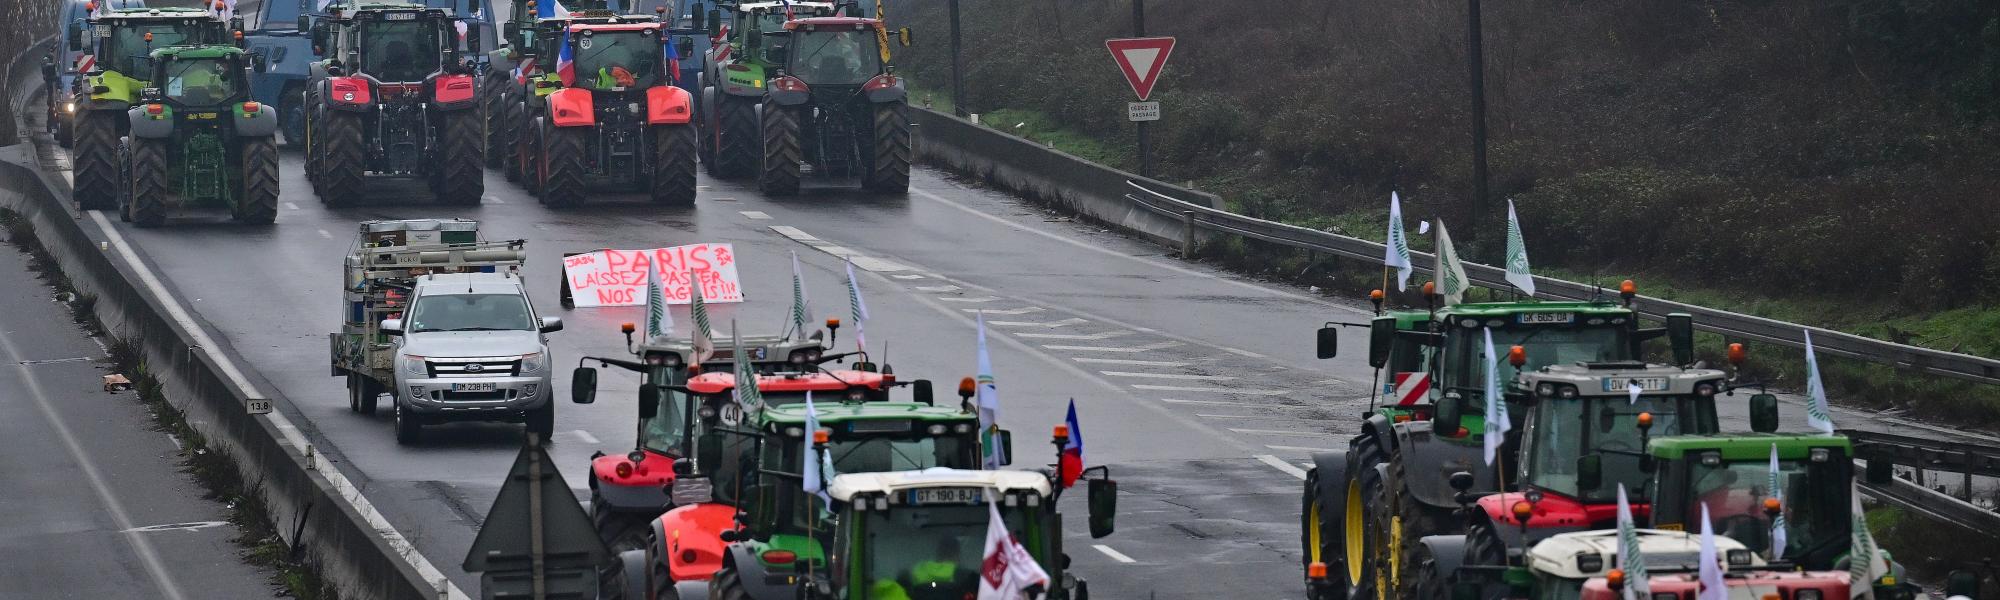 French protests: European Commission weighs options with IRU